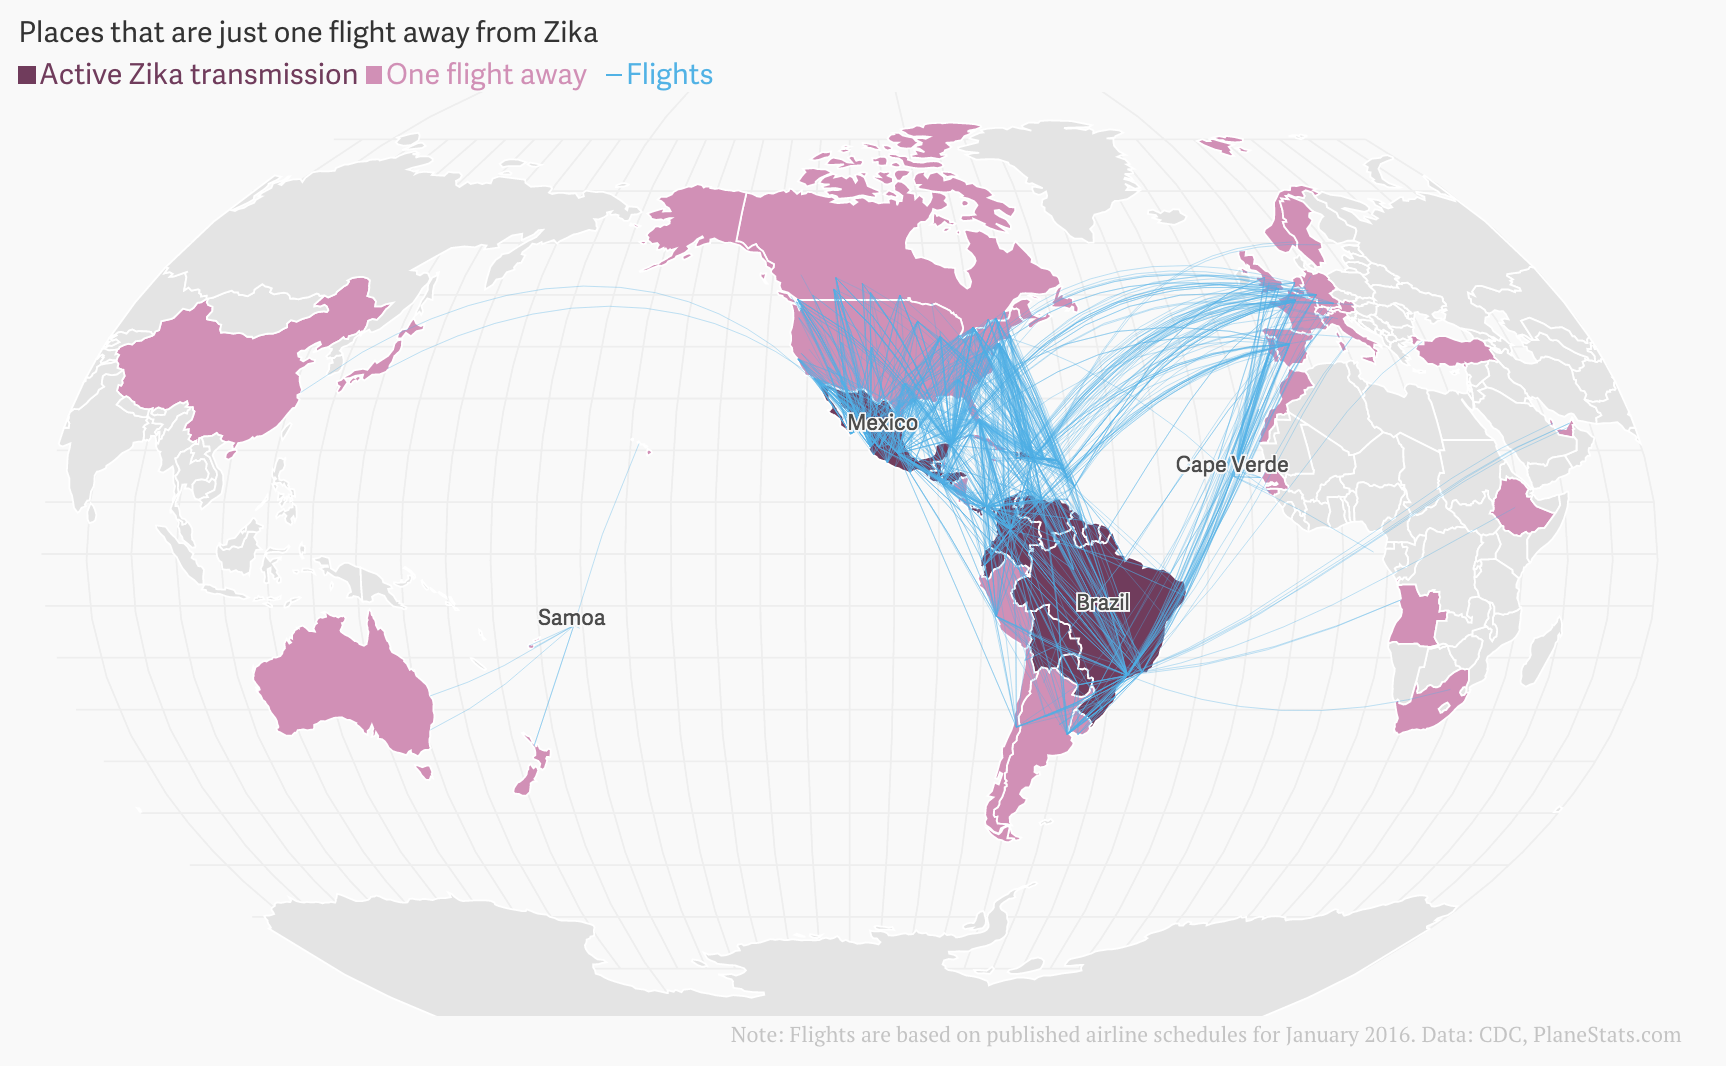 The spread of Zika virus: A roundup of visualizations